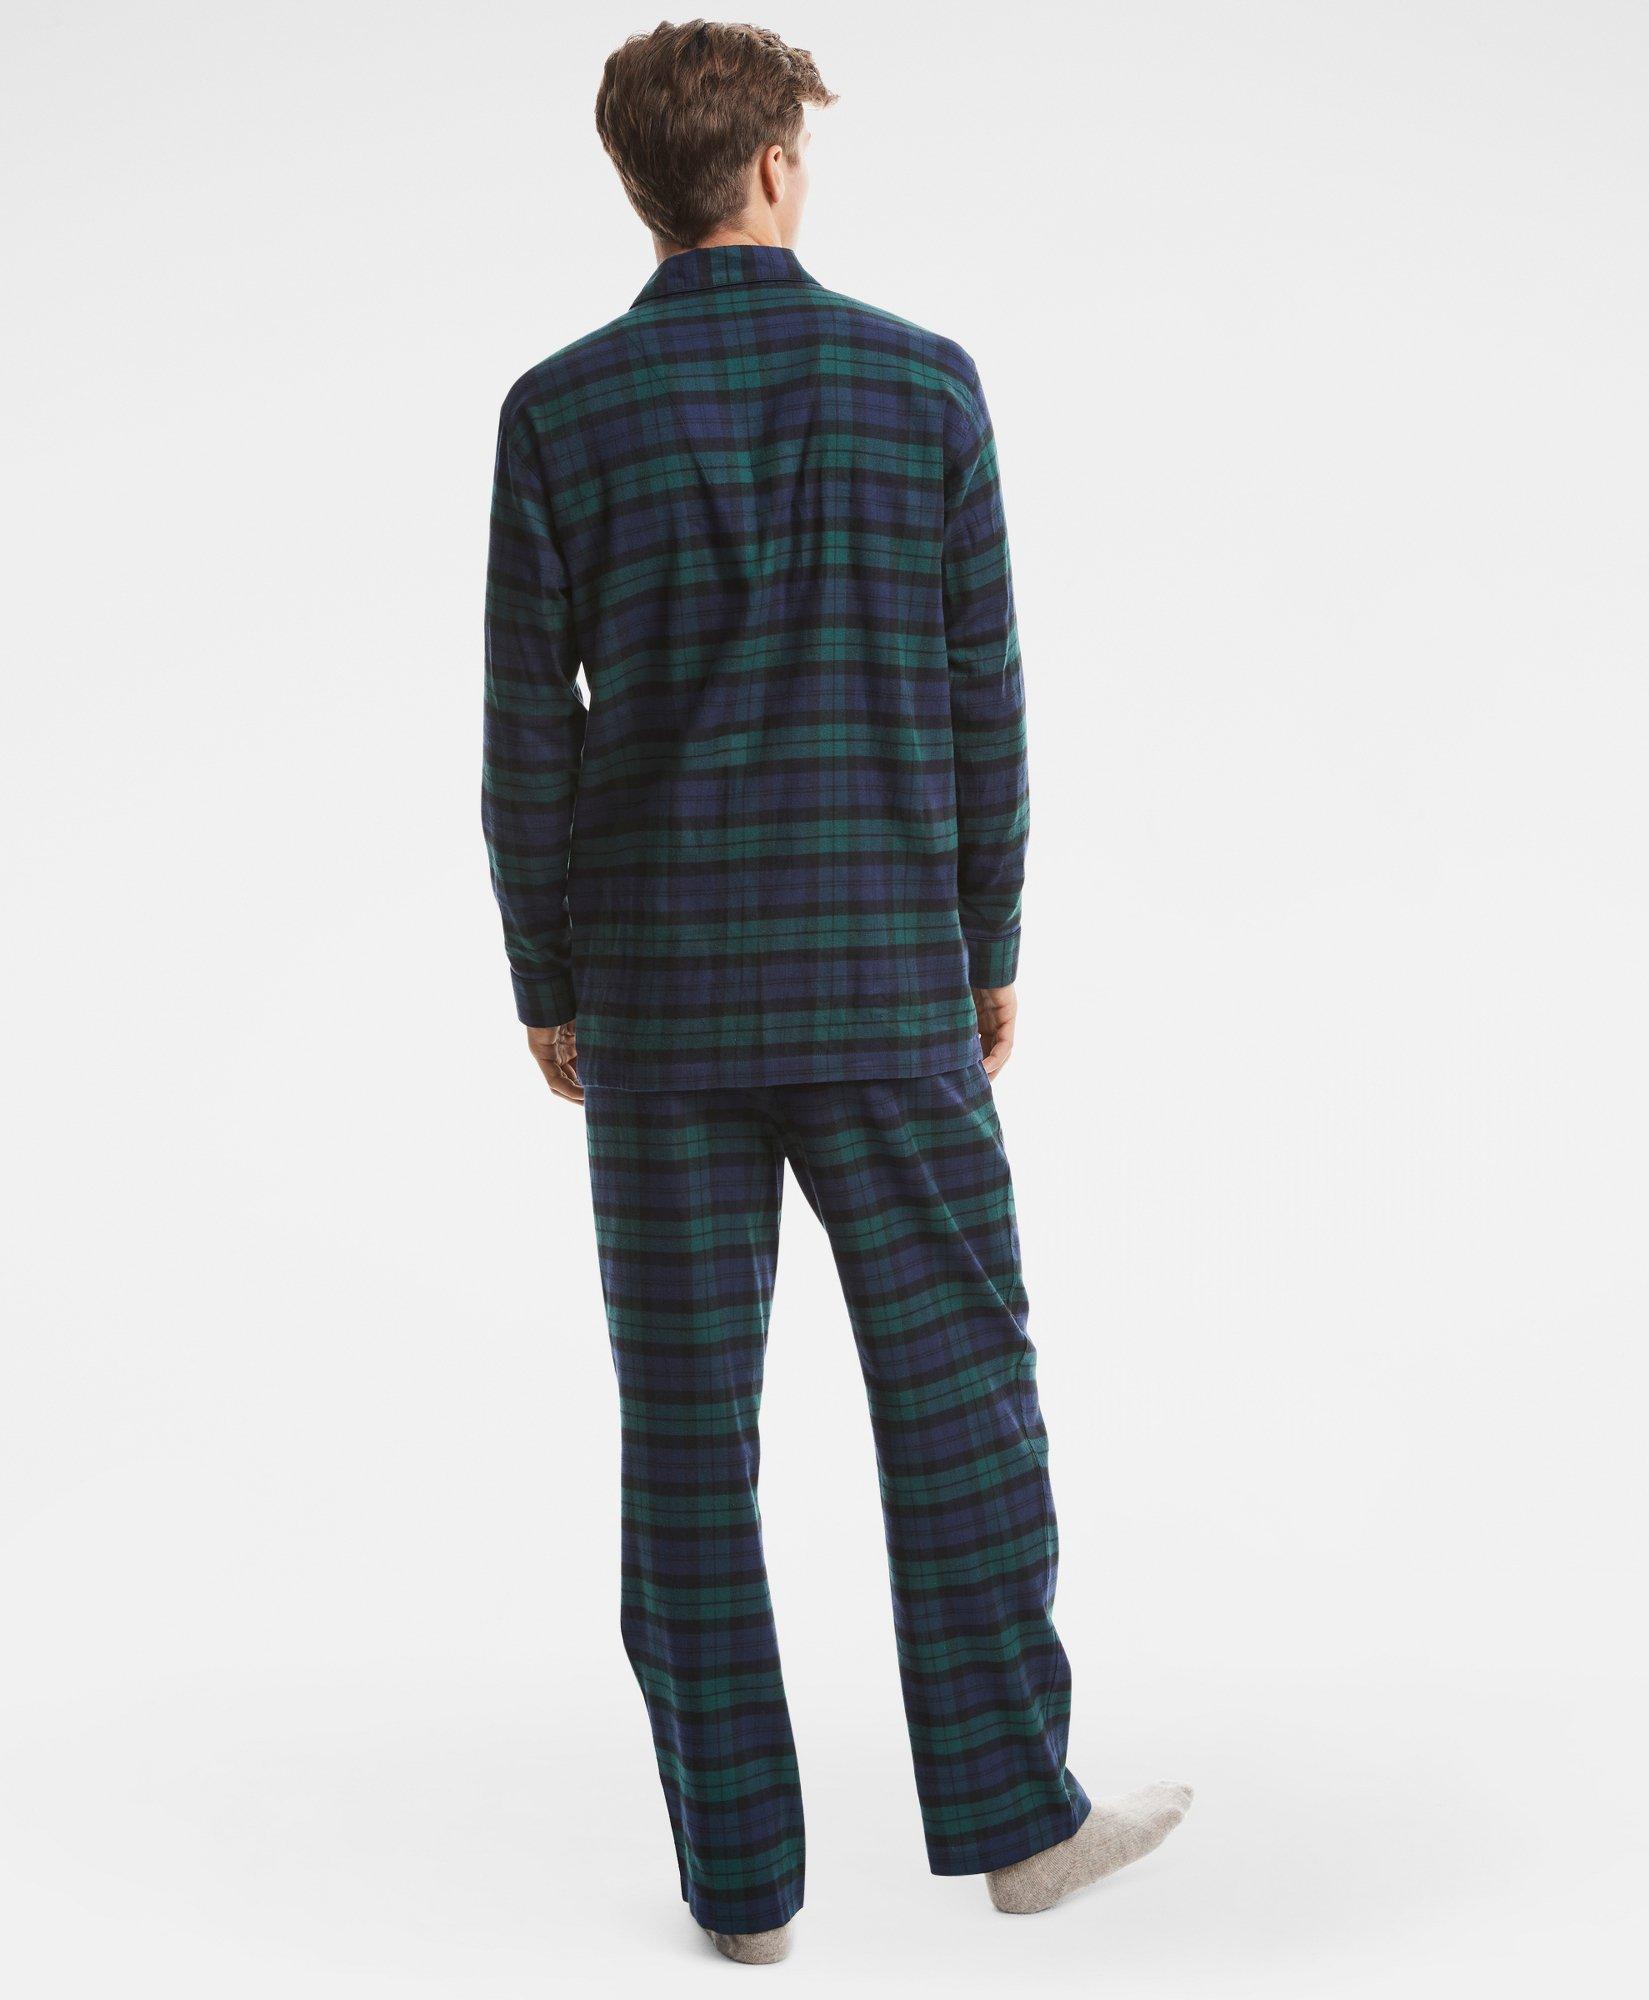 15 Best Pajamas for Men in 2023 - PureWow